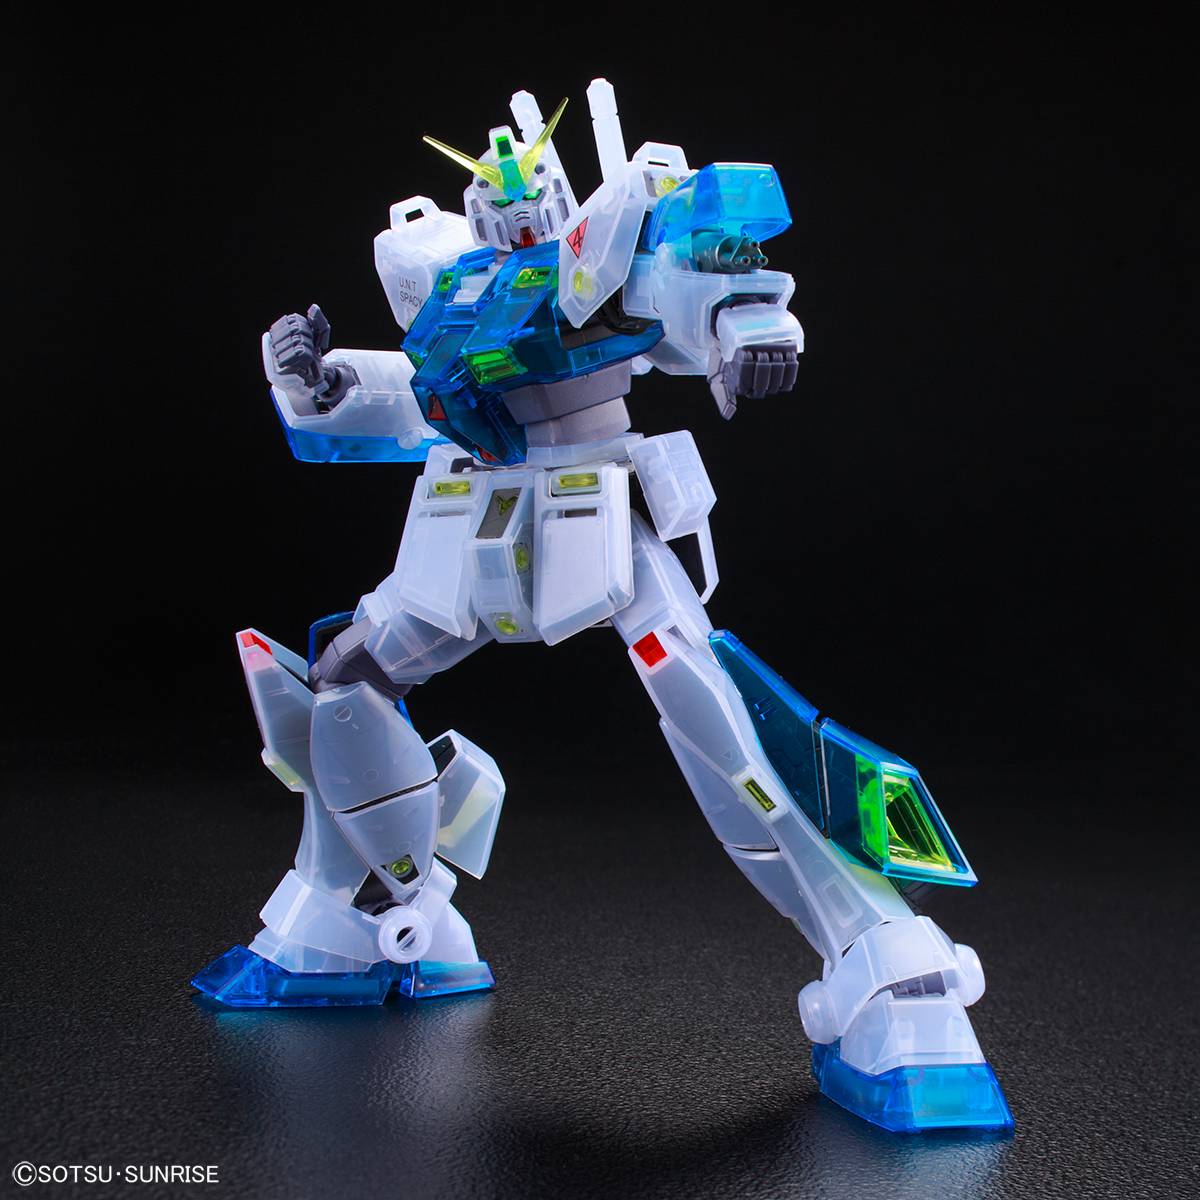 MG 1/100 GUNDAM NT-1 Ver.2.0 [CLEAR COLOR]